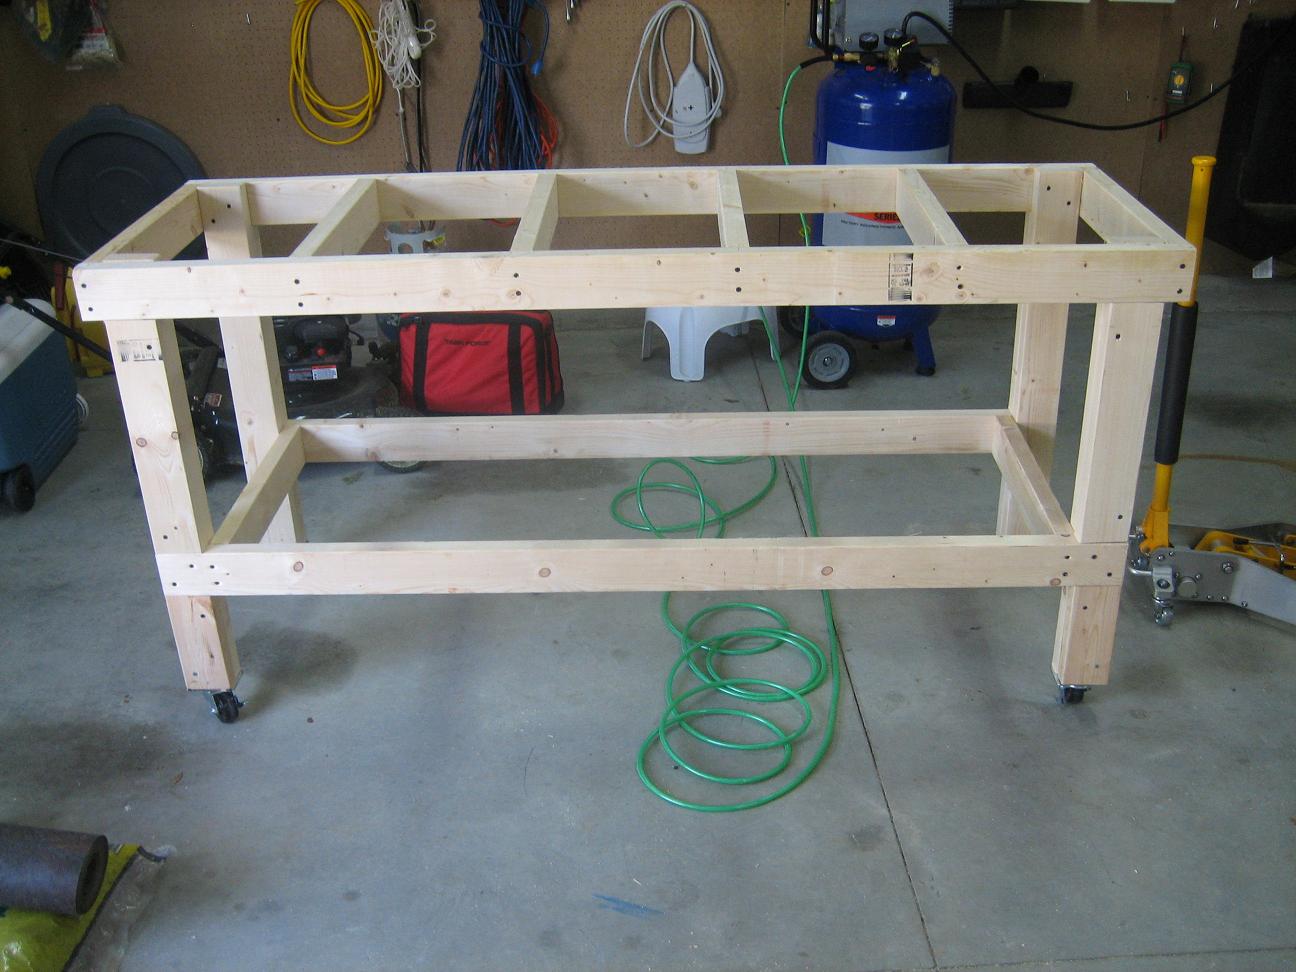 Flipped and looking like a workbench.